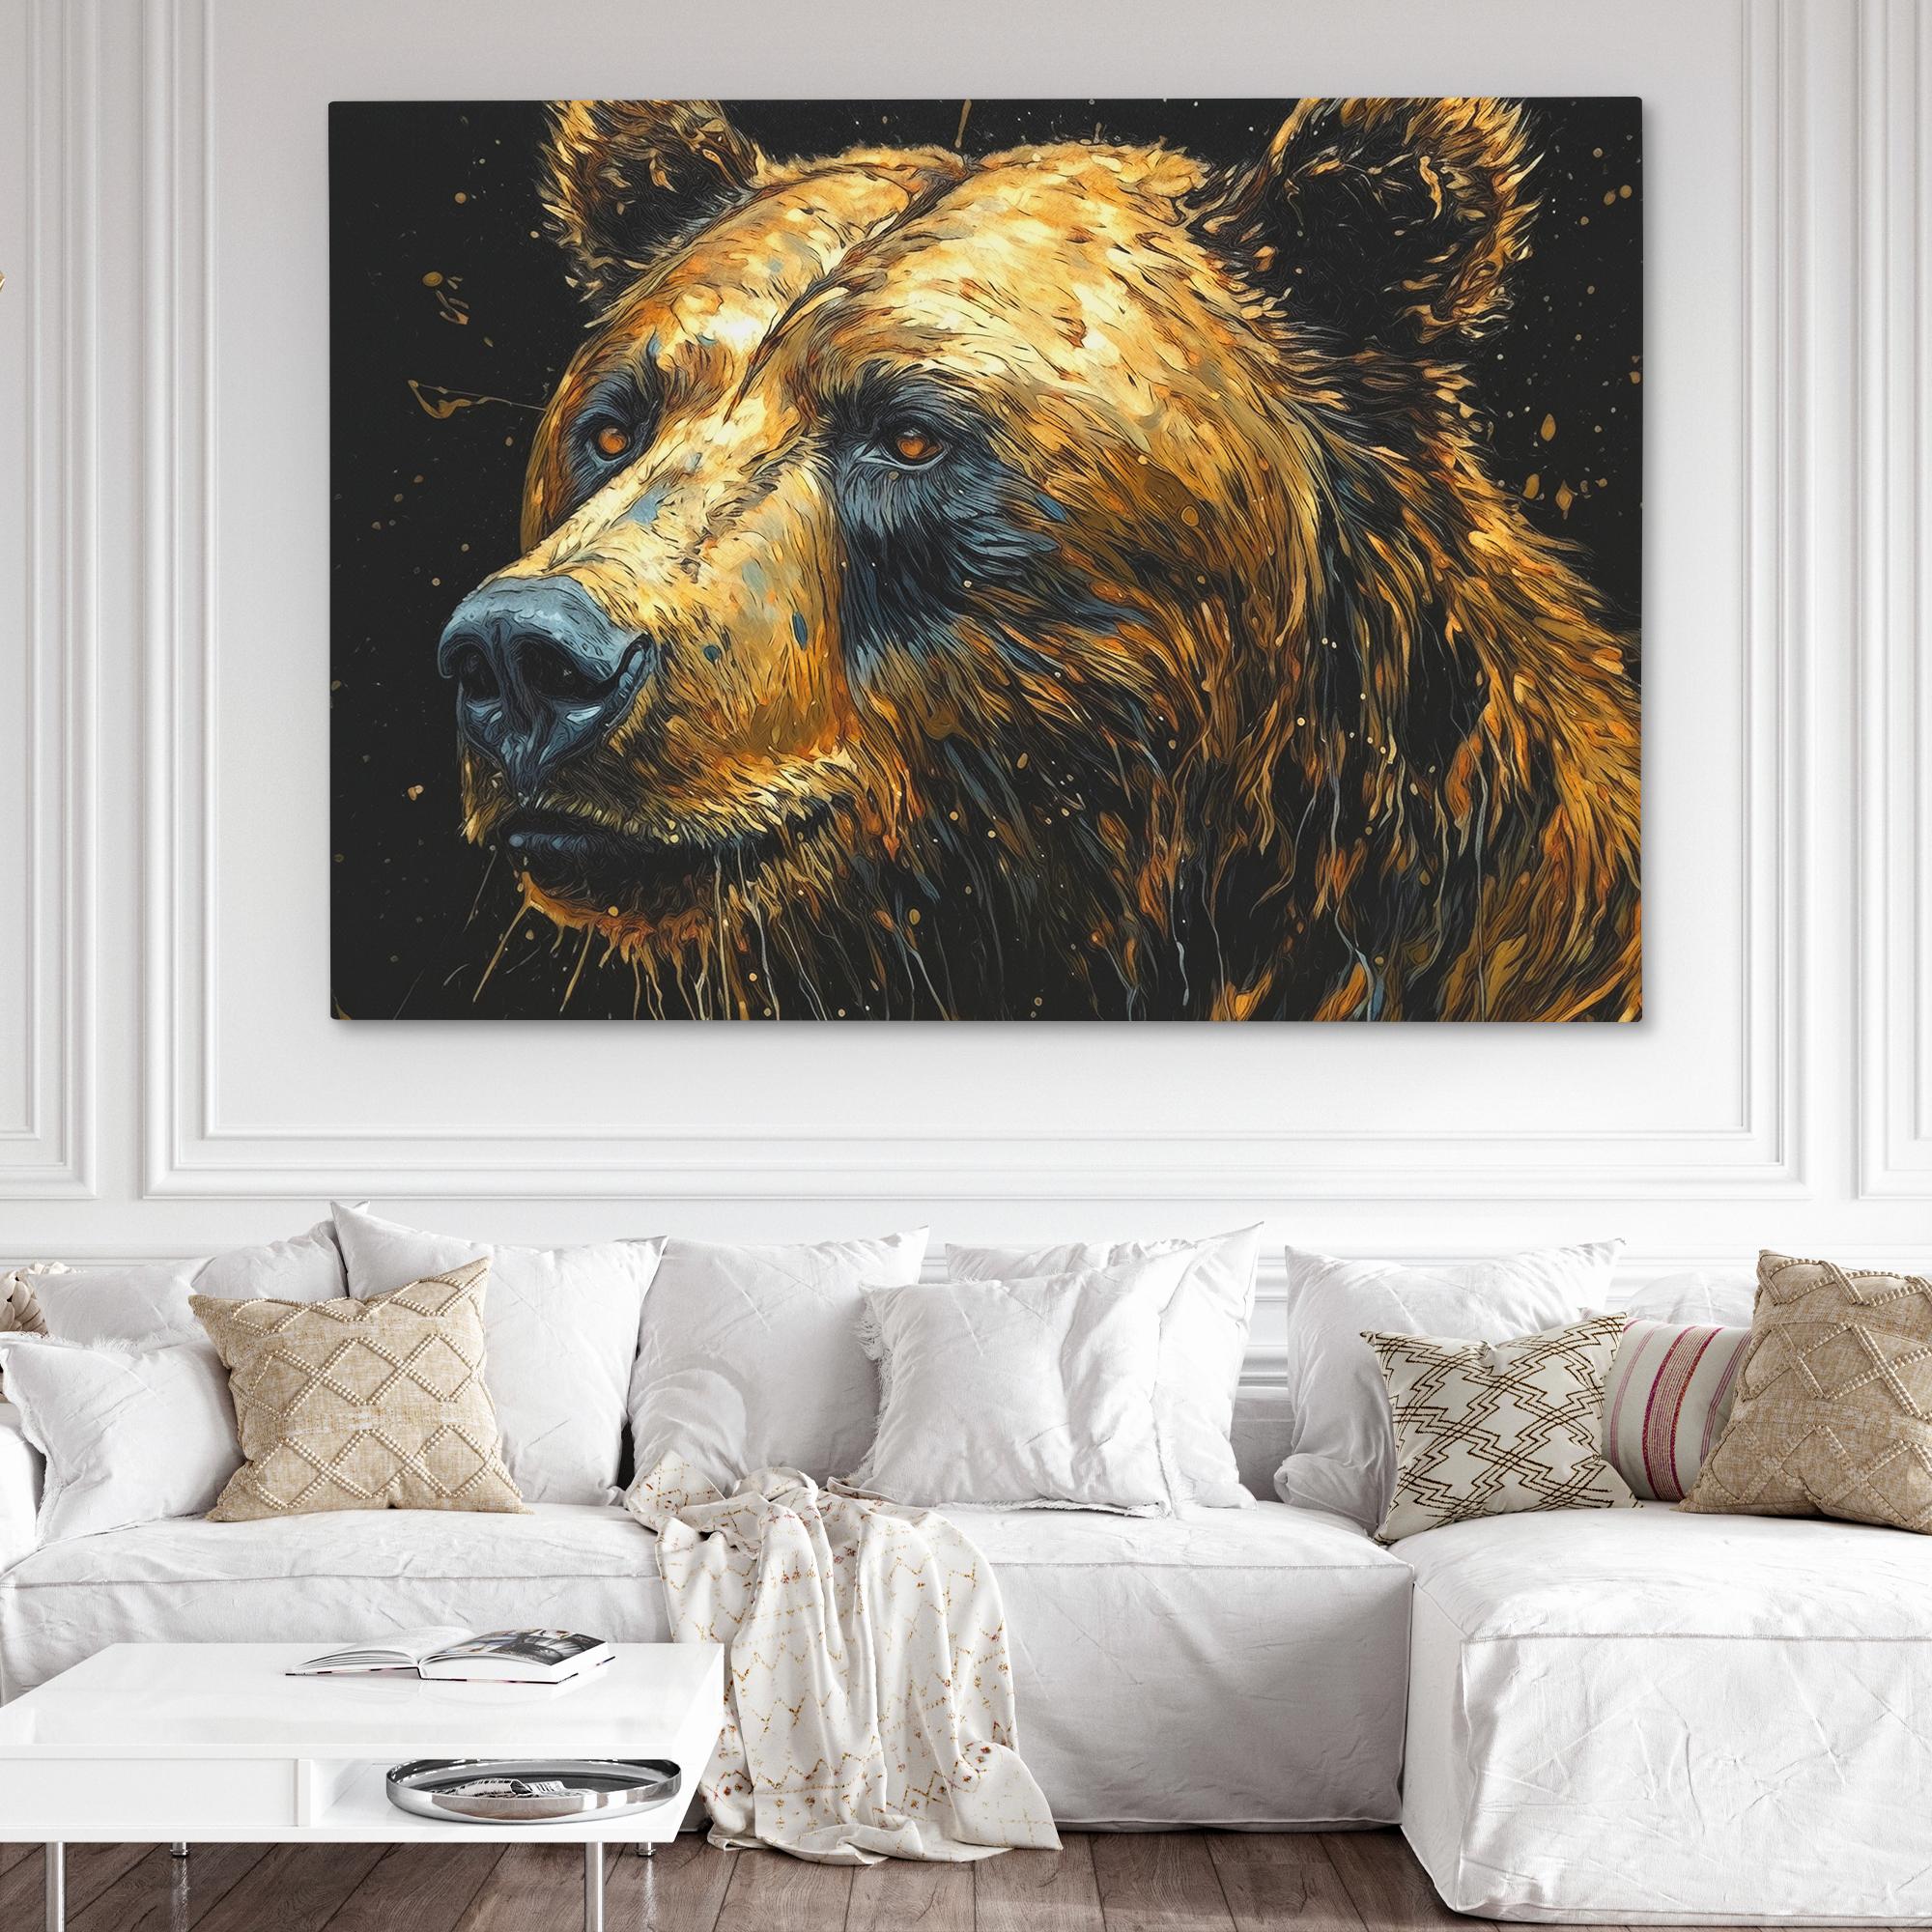 Wandering Grizzly Bear Wildlife Painting - Bear Wall Art